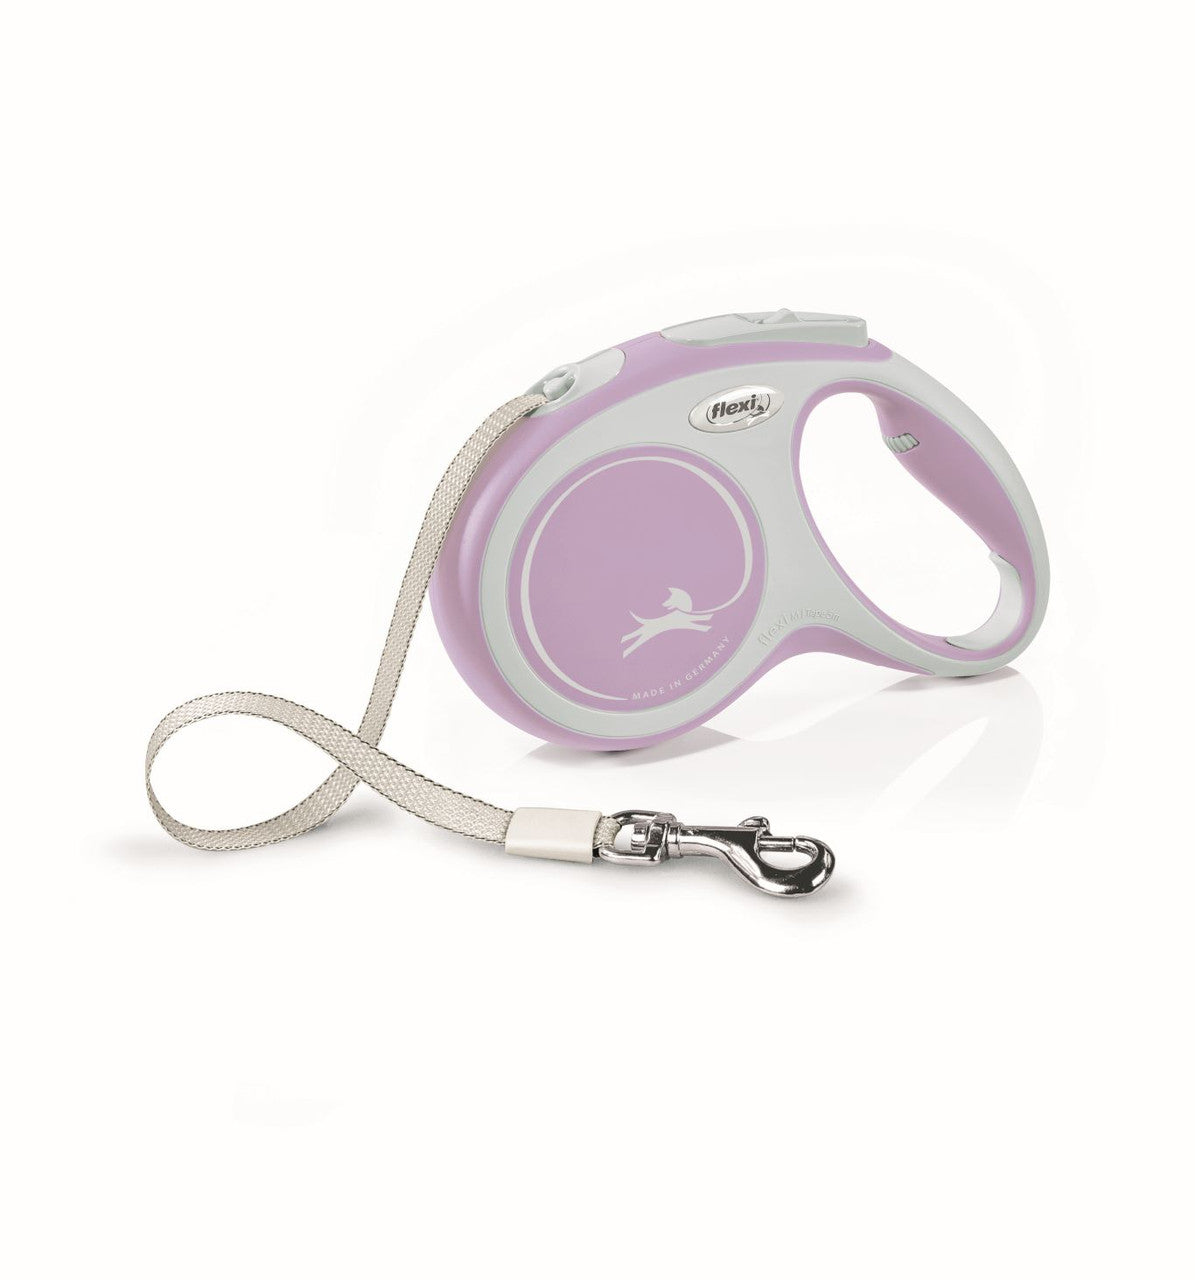 Flexi New Comfort Retractable Tape Dog Leash Pink 16ft MD up to 55lb